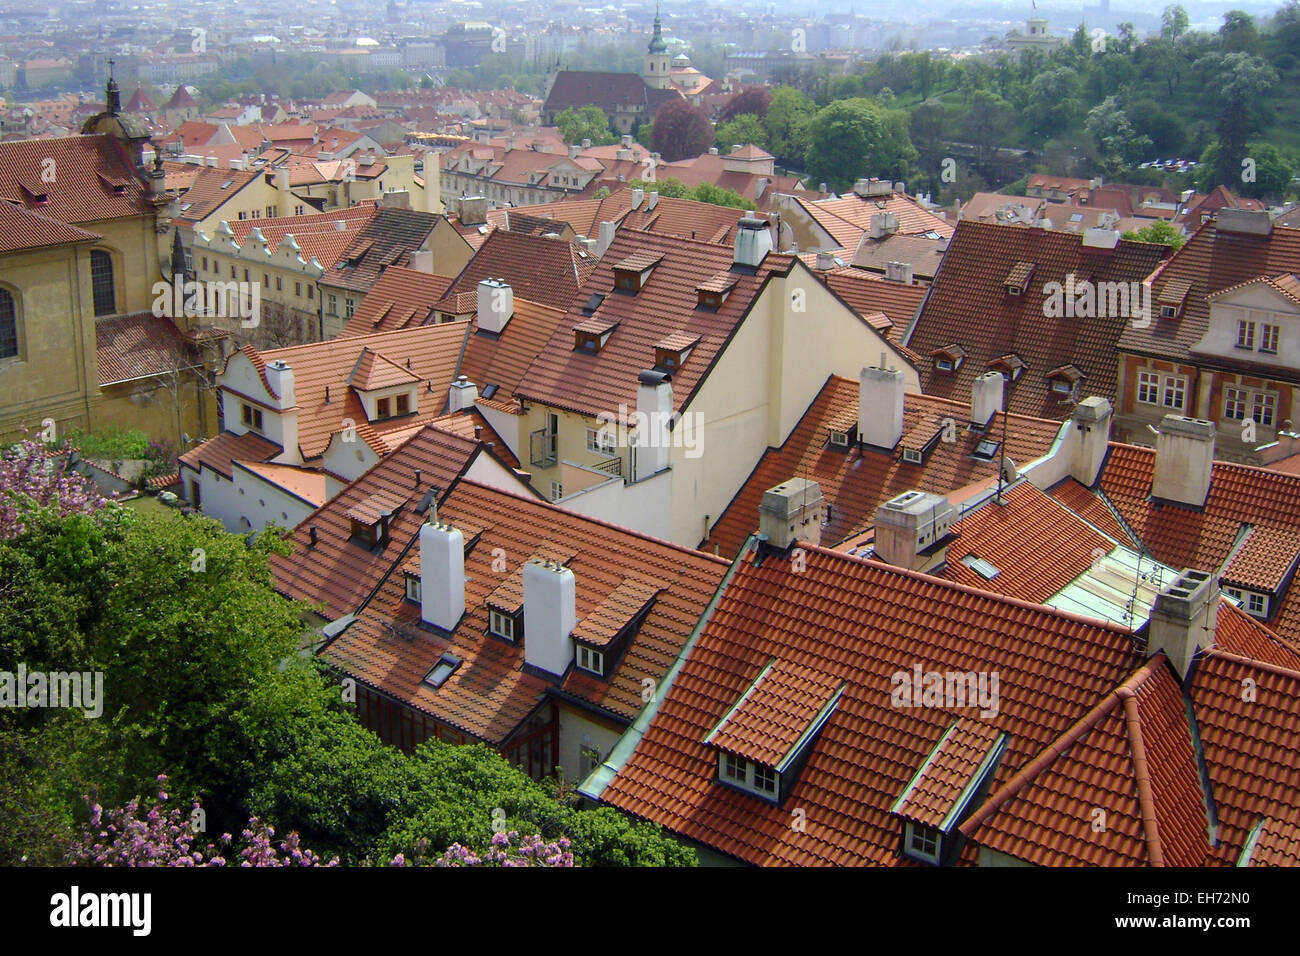 View of the roofs and chimneys of the old and well-preserved city of Prague. Stock Photo